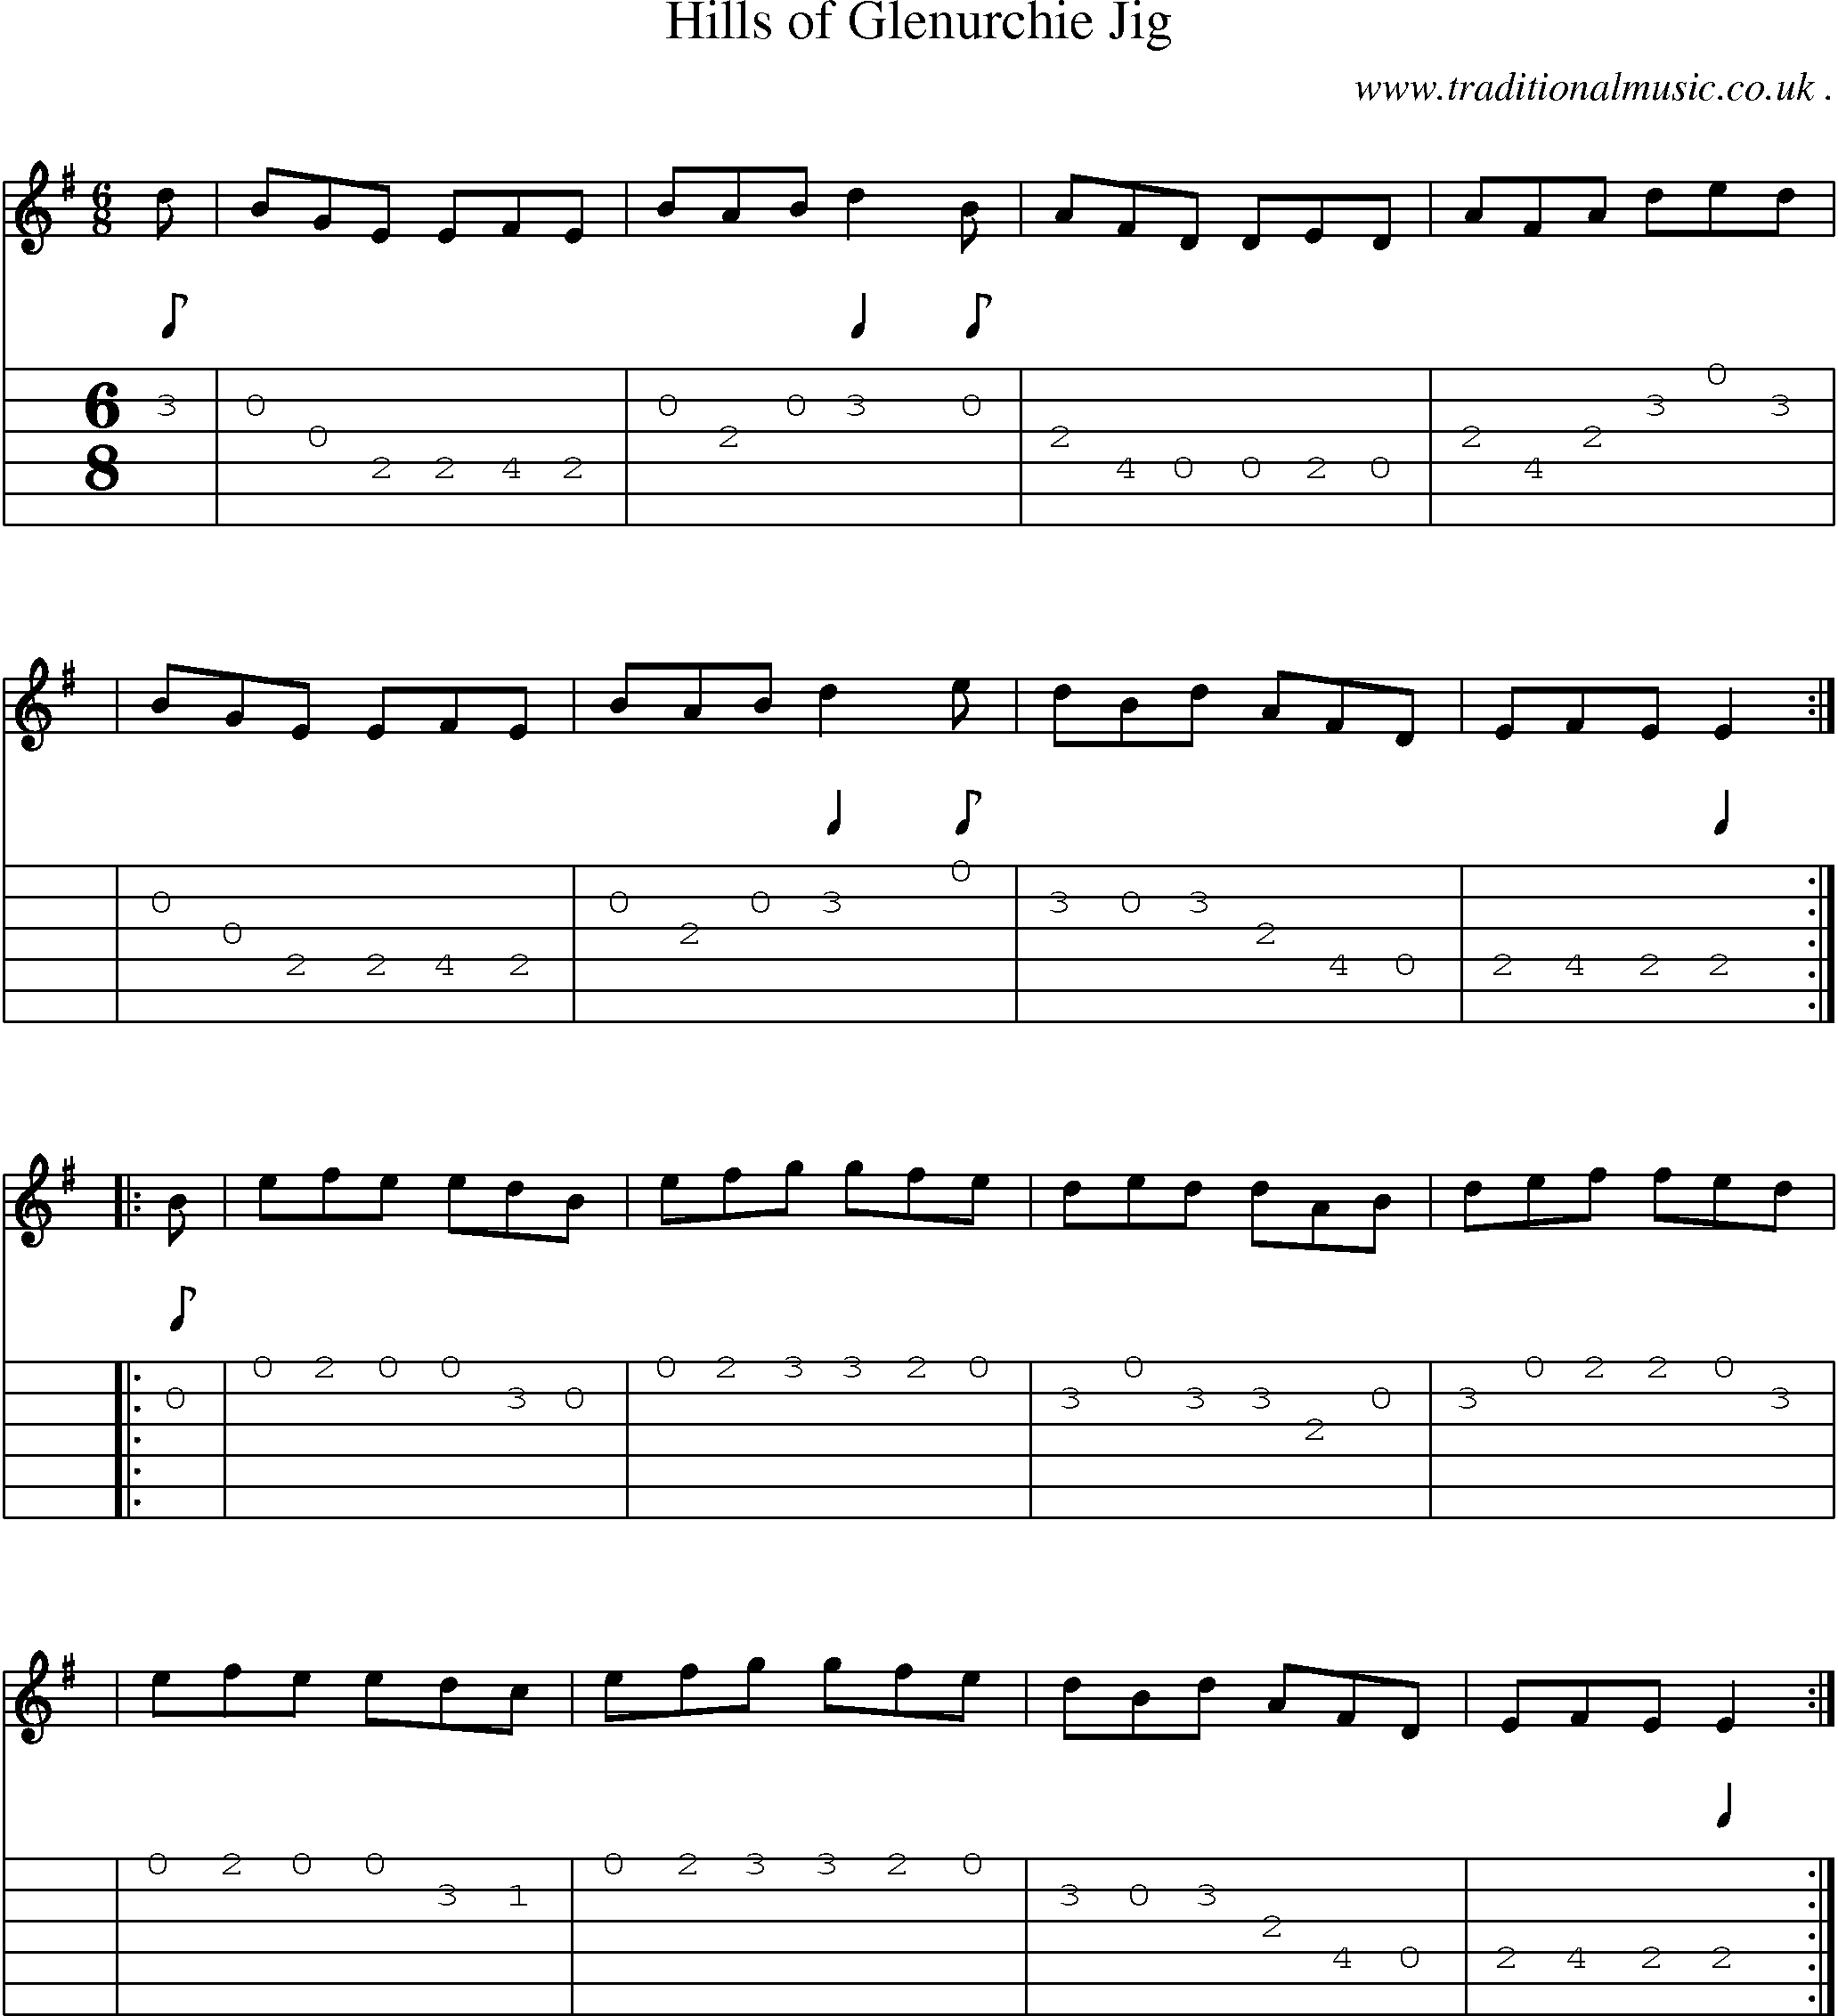 Sheet-Music and Guitar Tabs for Hills Of Glenurchie Jig